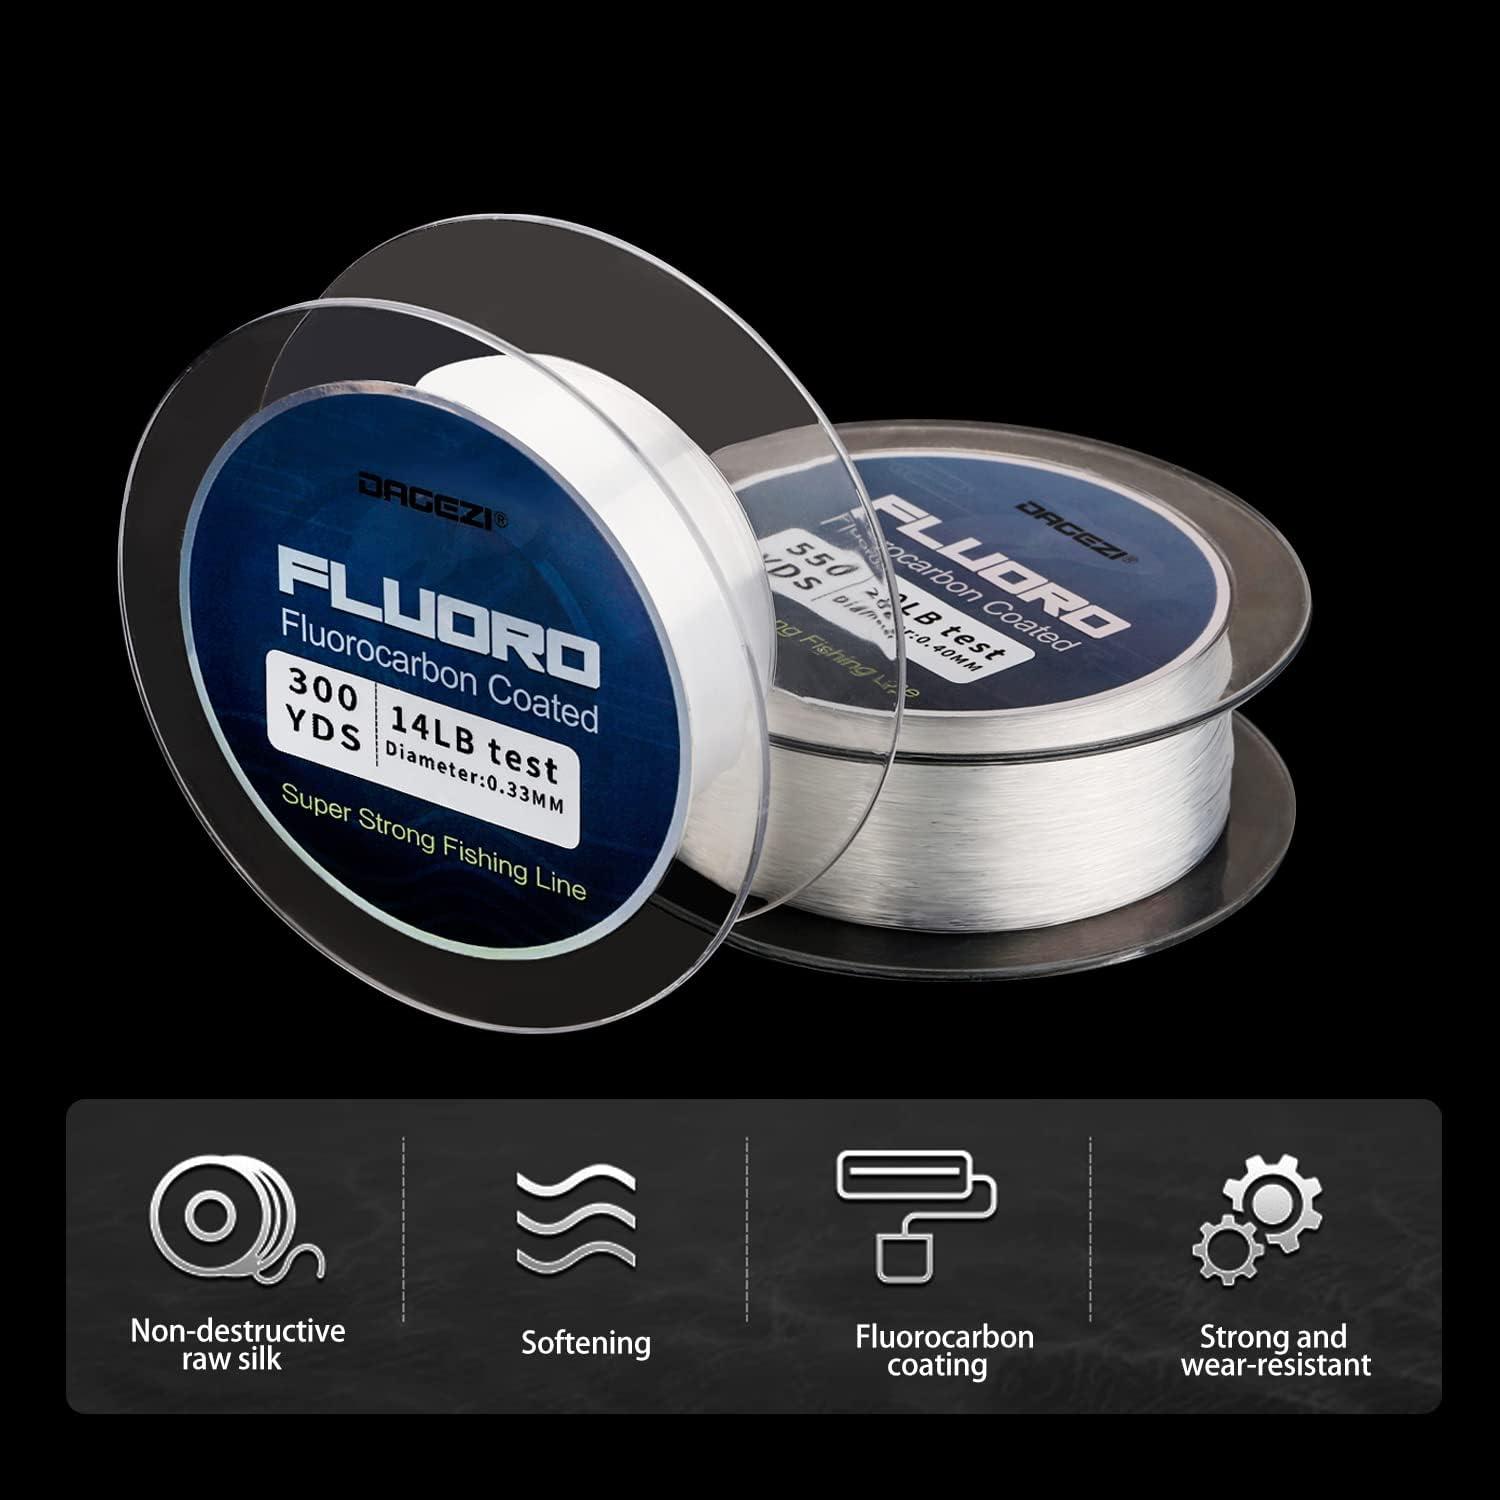 DAGEZI Fluorocarbon Coated Fishing Line 300yds / 550yds Faster Sinking  Abrasion Resistant Invisible Super Strong Fishing Line 550.0 Yards 25lb (11.33kg)-0.45mm